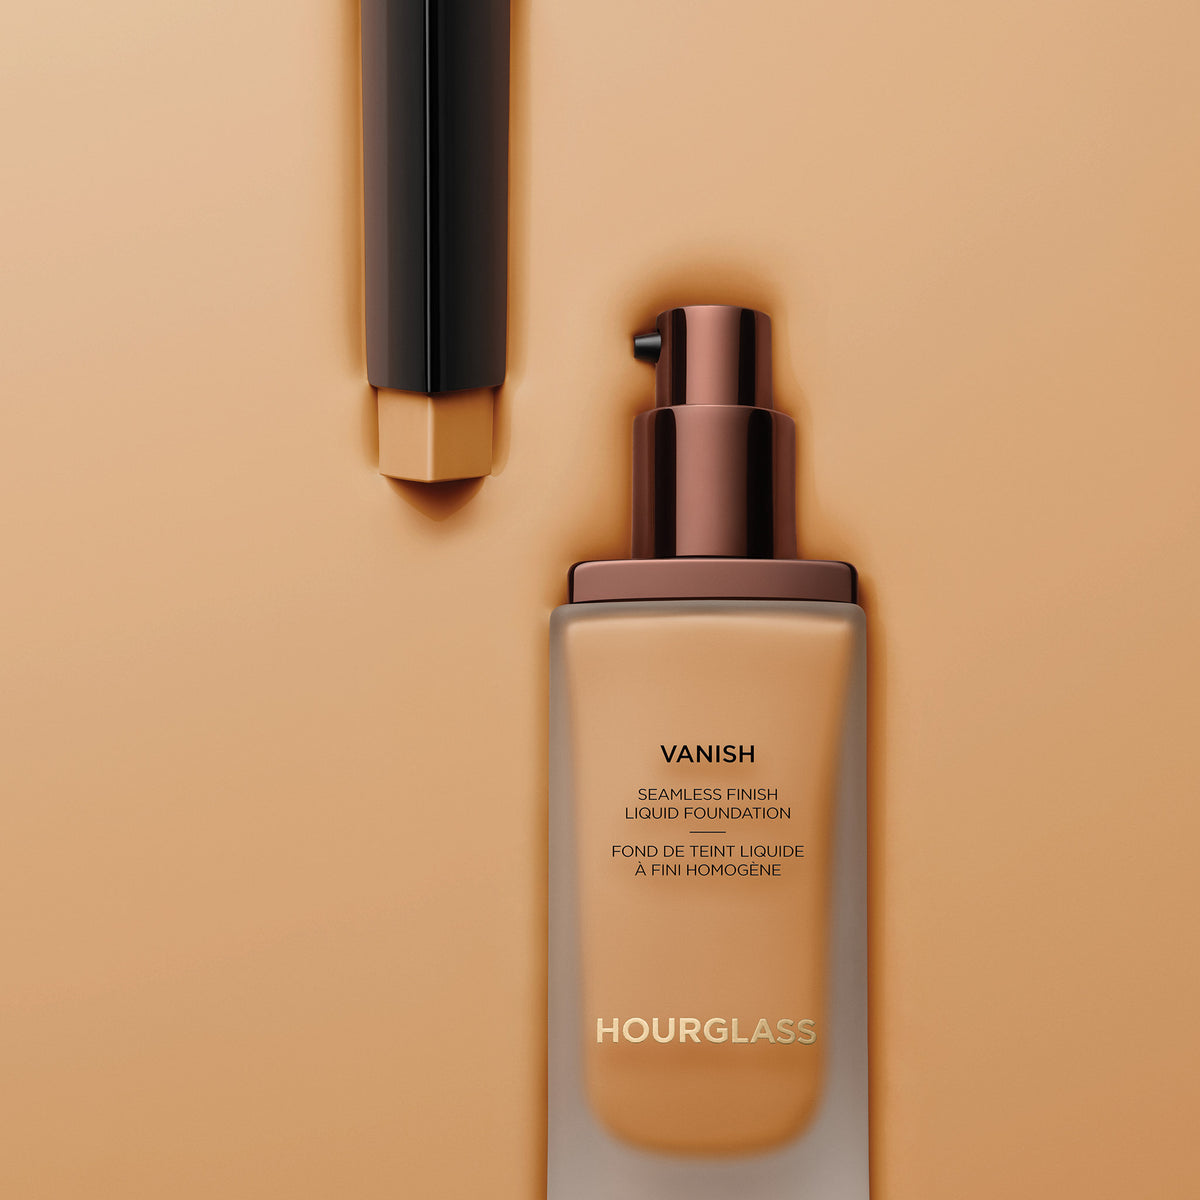 Get Instant Skin Perfection With The Hourglass Vanish Airbrush Primer